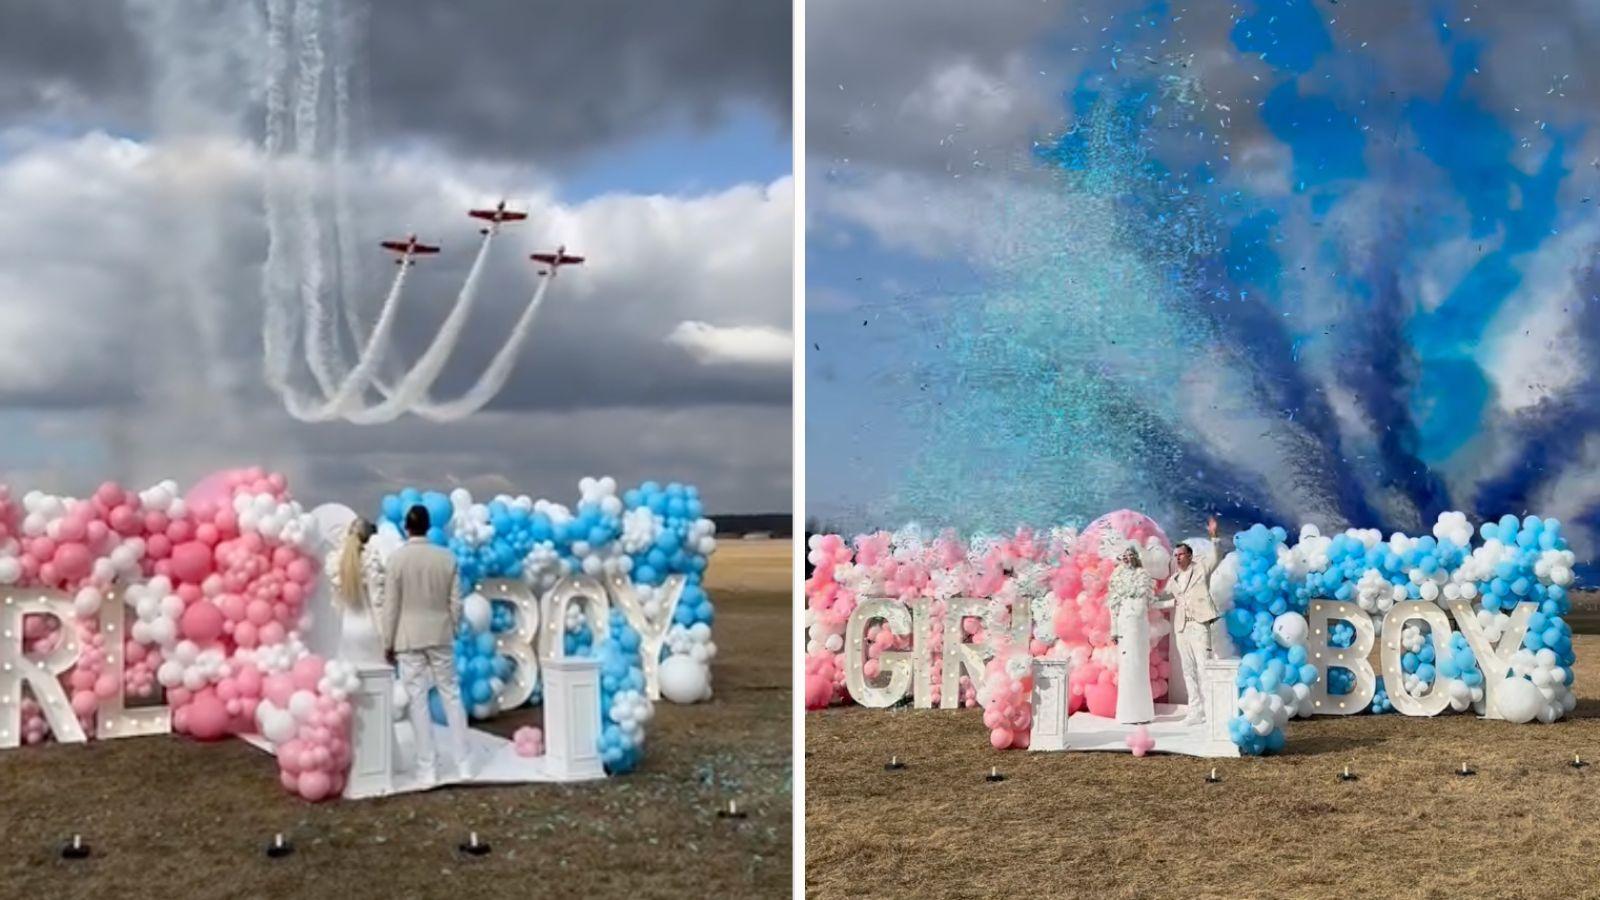 Influencer faces backlash for polluted gender reveal party